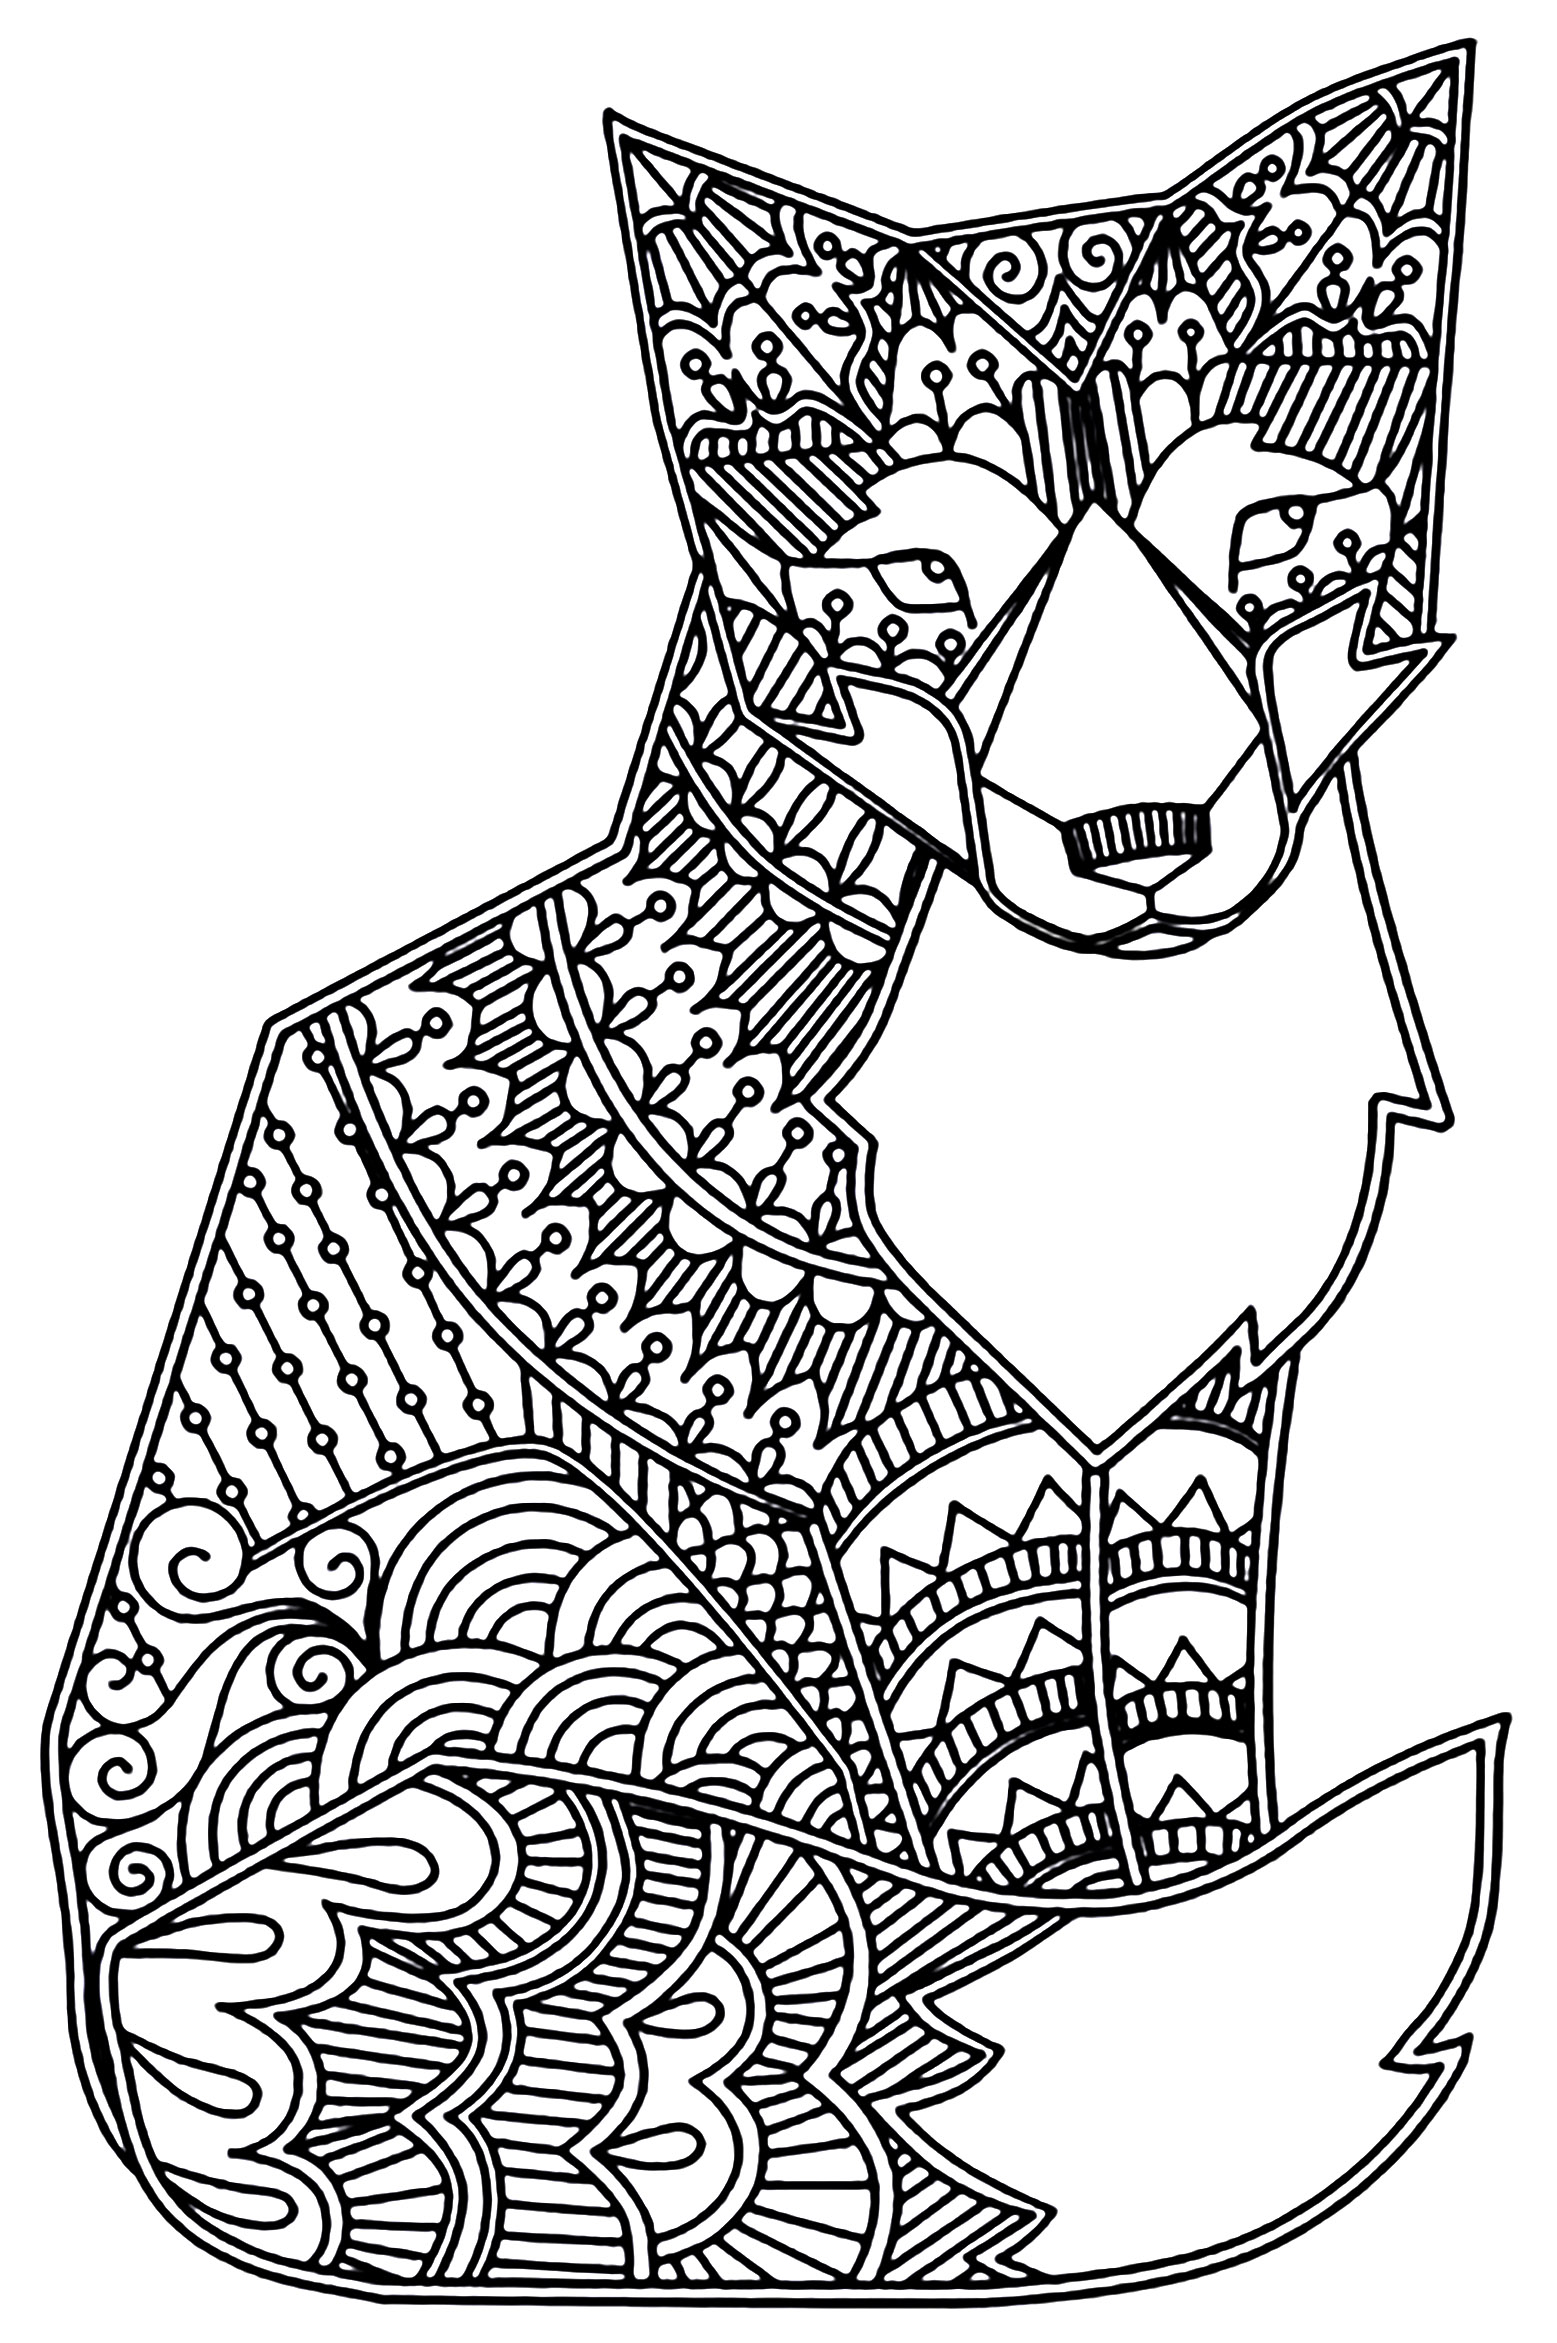 Download Mandala Fox Coloring Page - Free Printable Coloring Pages ...